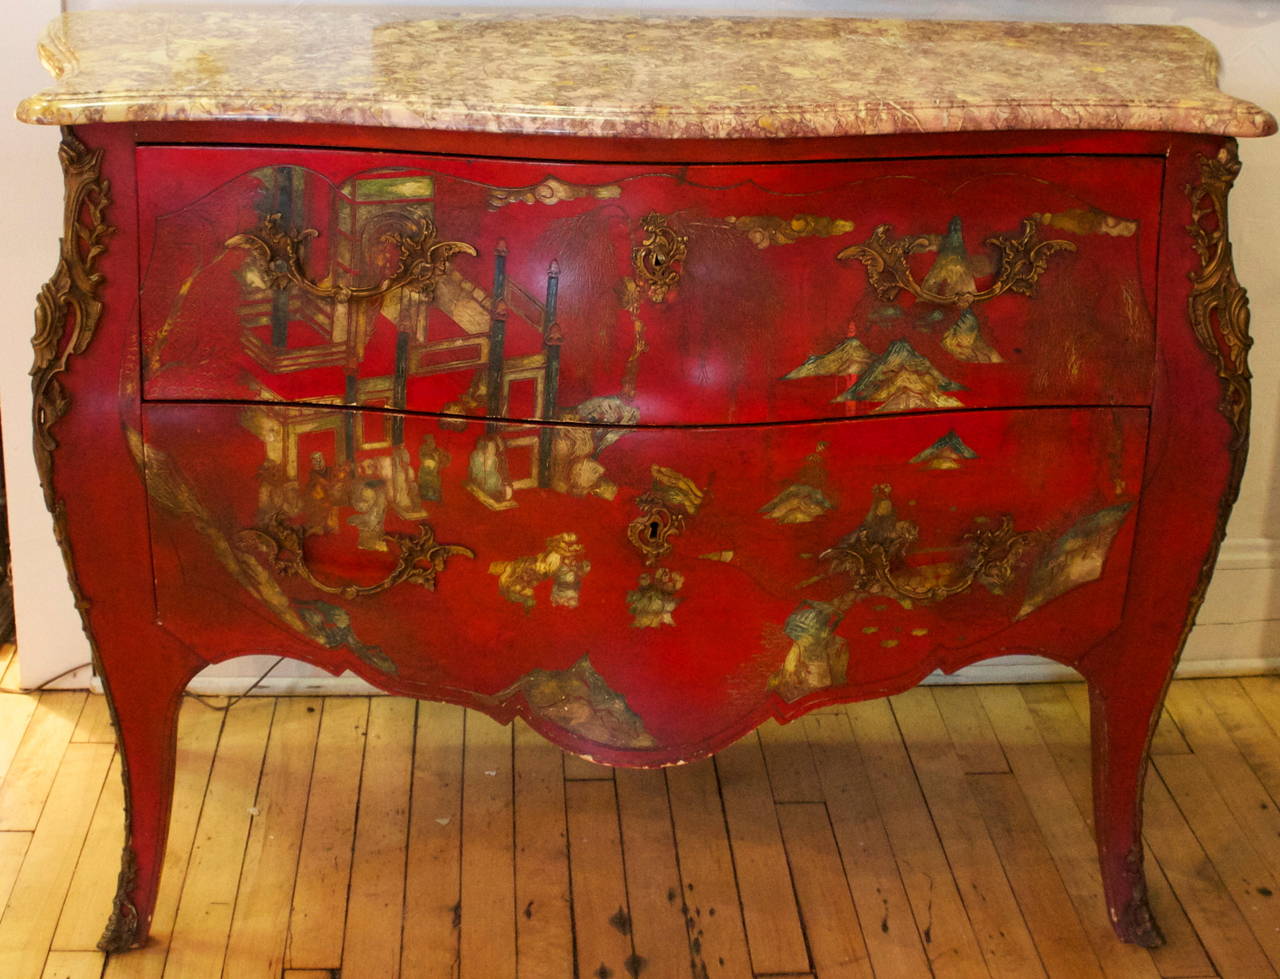 The breche violette marble-top over a conforming case with two long drawers raised on cabriole legs, decorated with a scene of pavilions and figures in a landscape on a red ground.